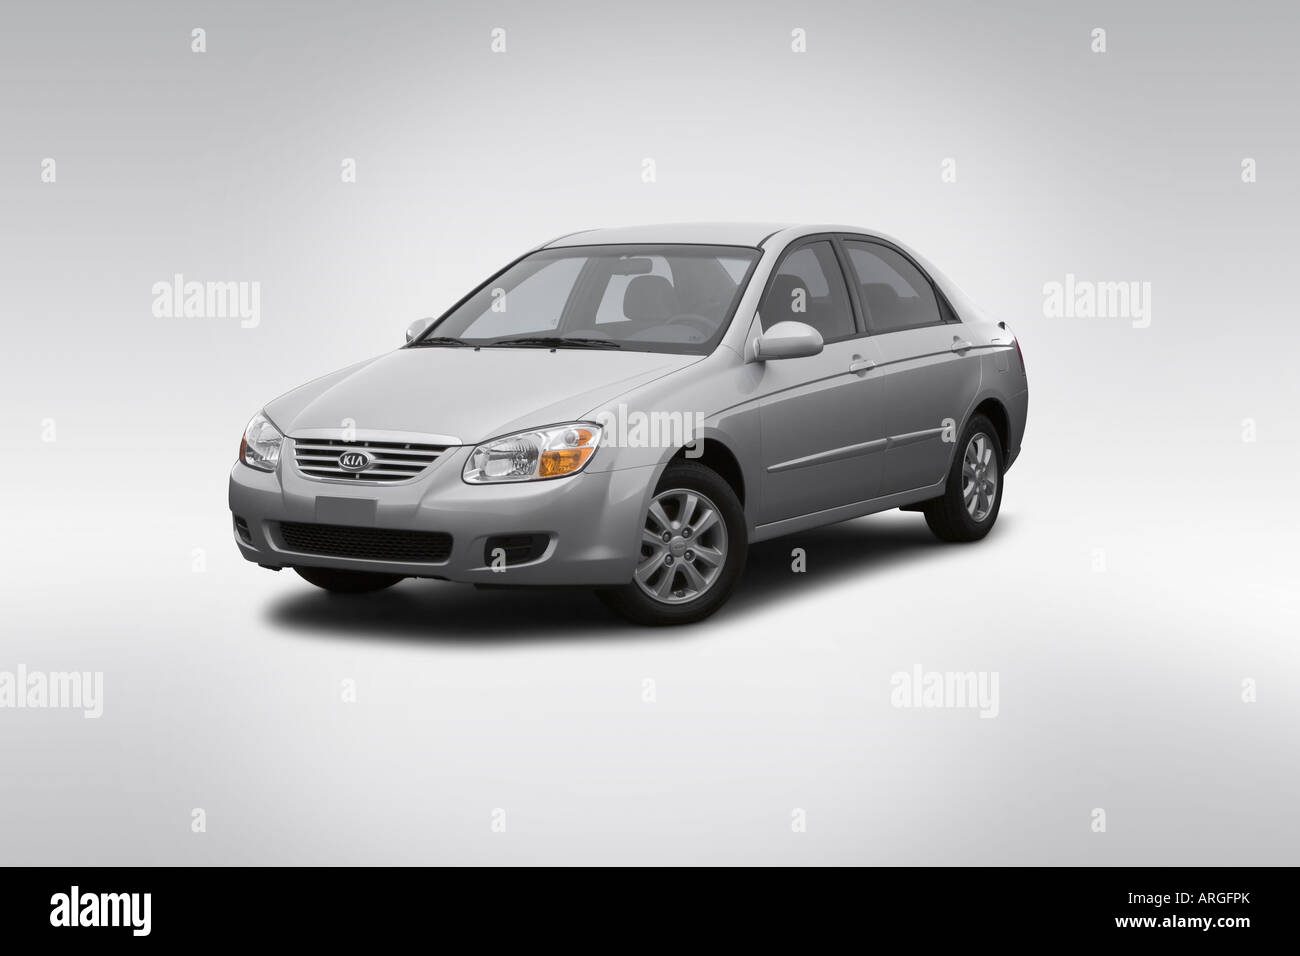 2007 Kia Spectra EX in Silver - Front angle view Stock Photo - Alamy